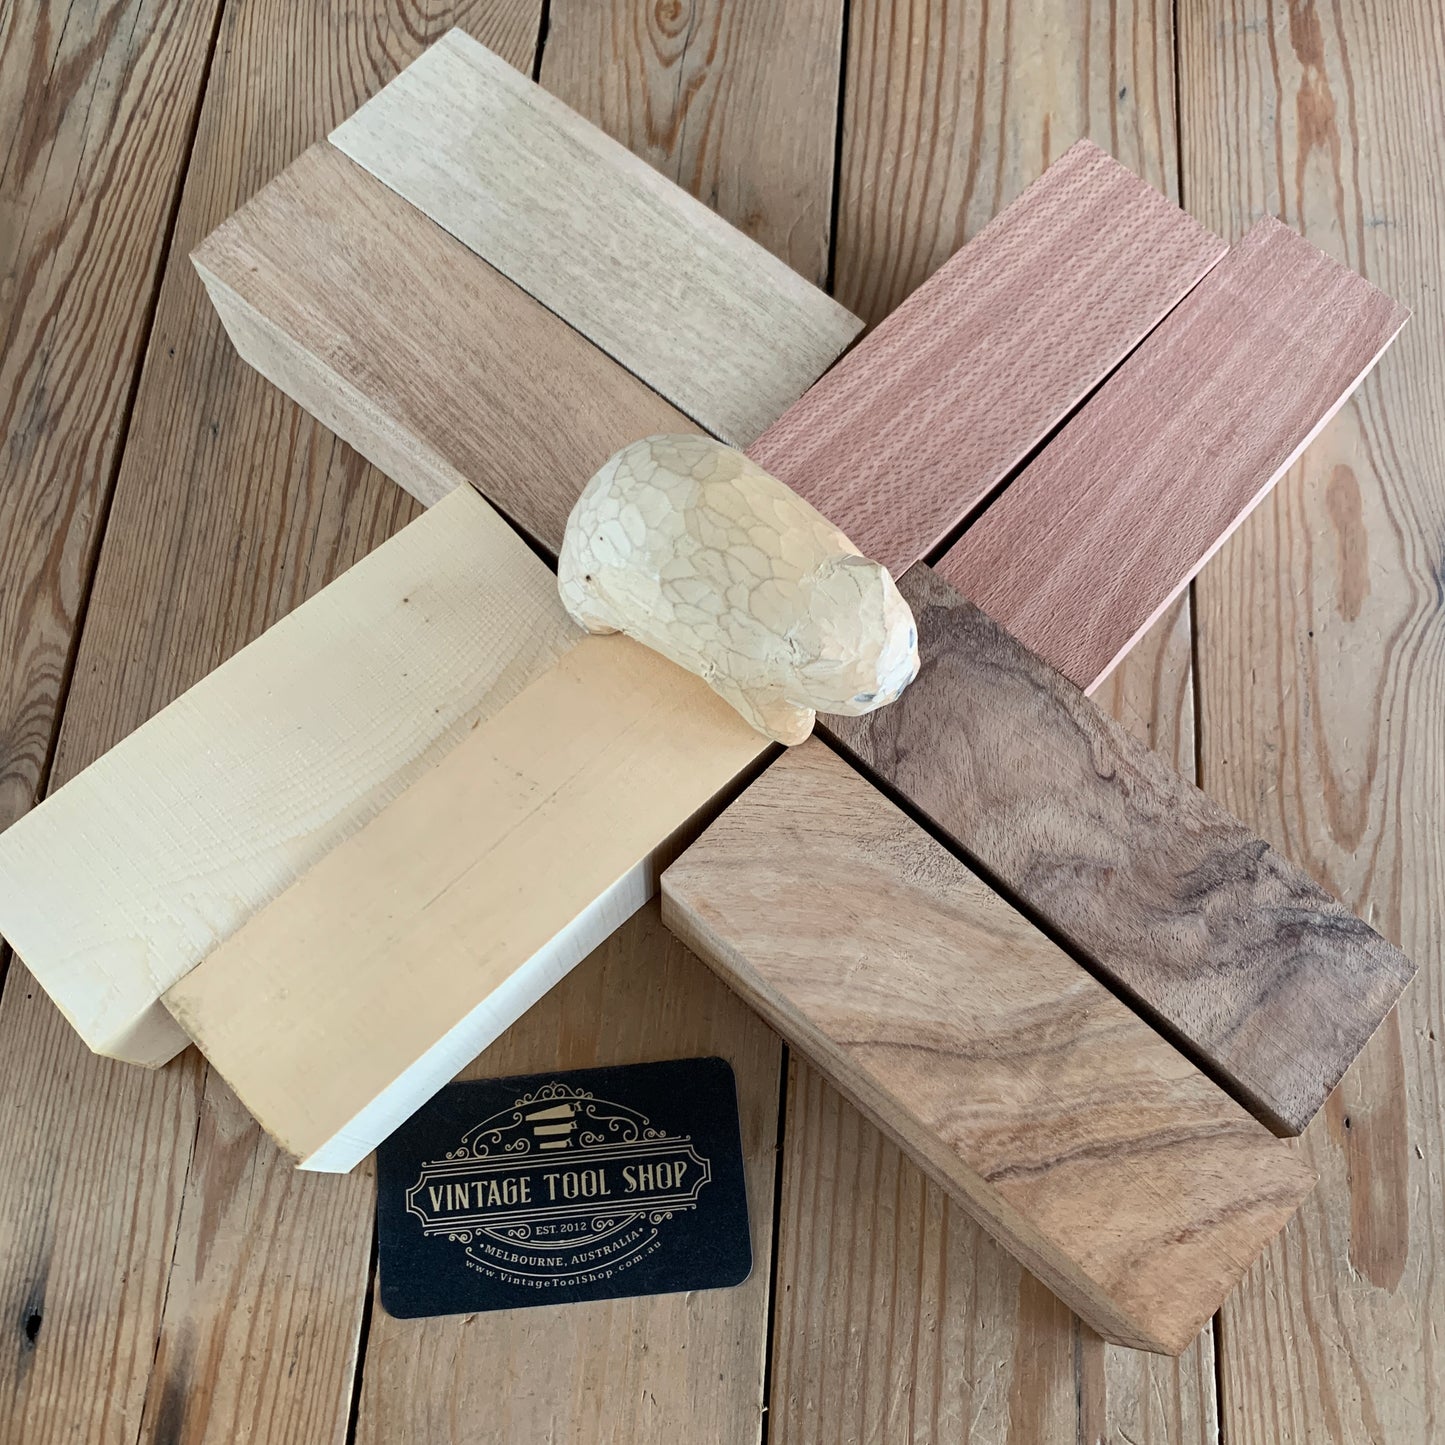 GH-S New! 1x SMALL assorted Australian timber CARVING BLOCK